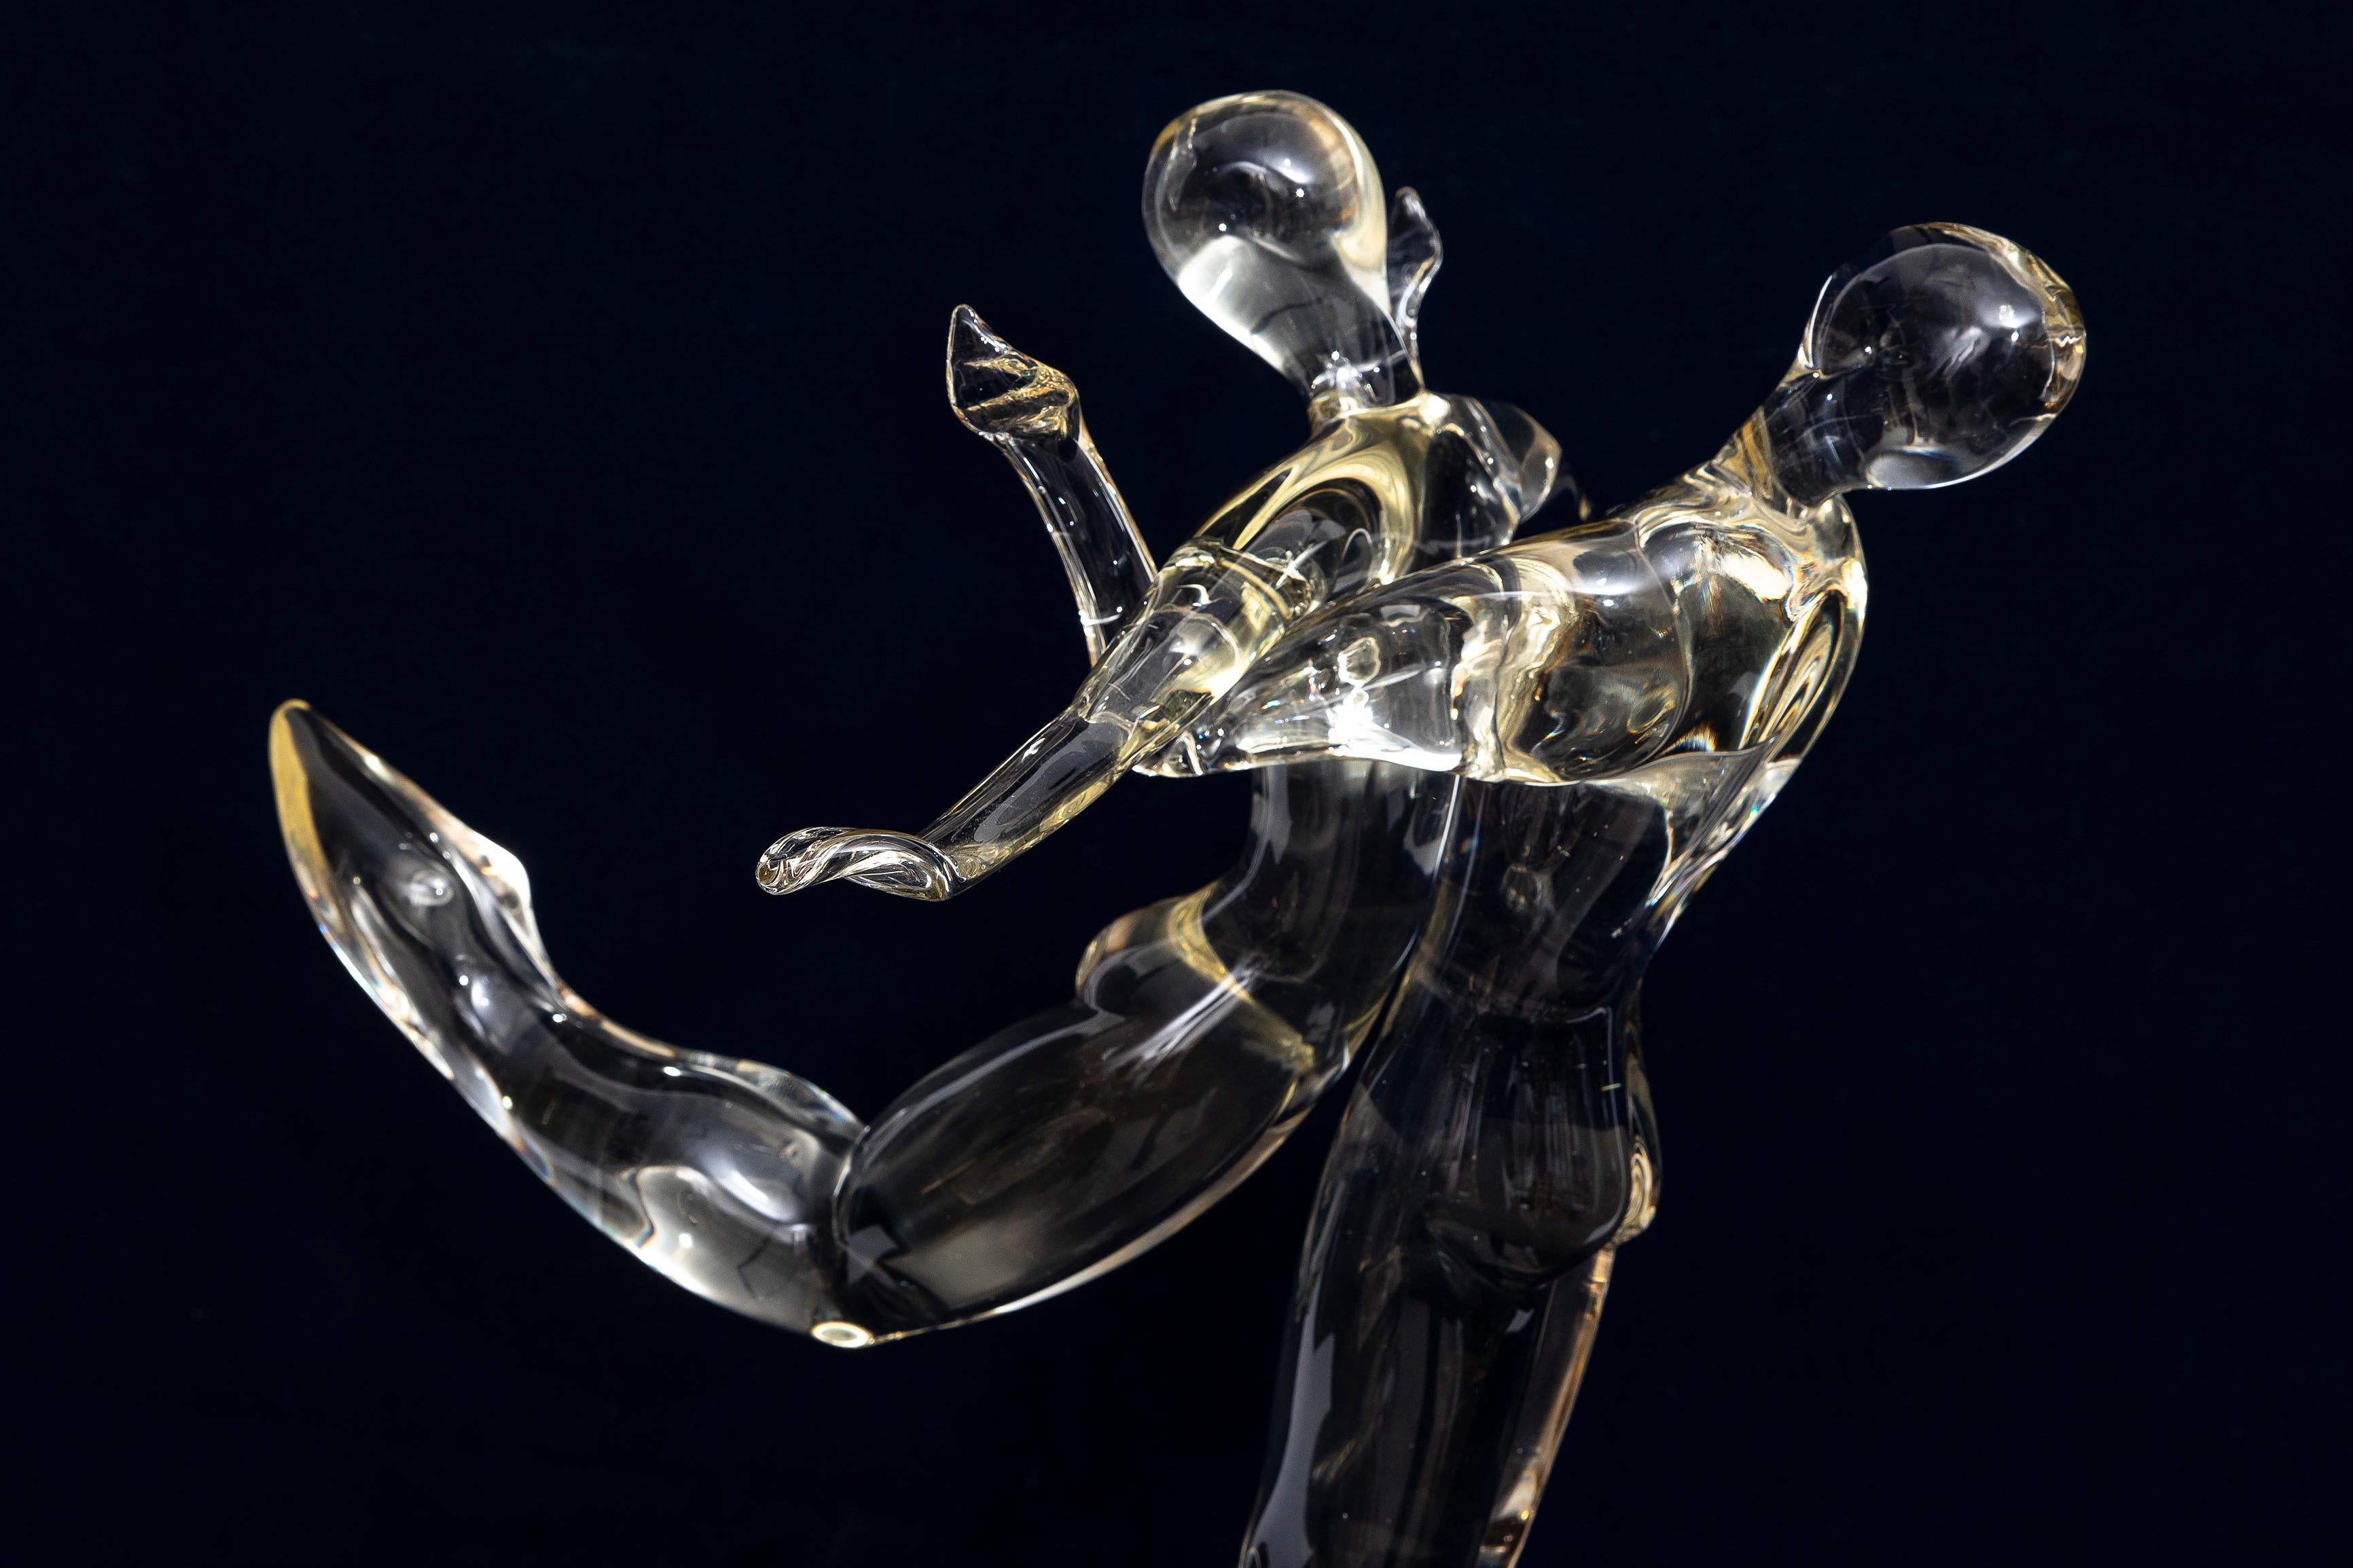 Crystal A Two-piece Renato Anatra Gymnast Dancer Sculpture by Murano Art Glass, Signed For Sale